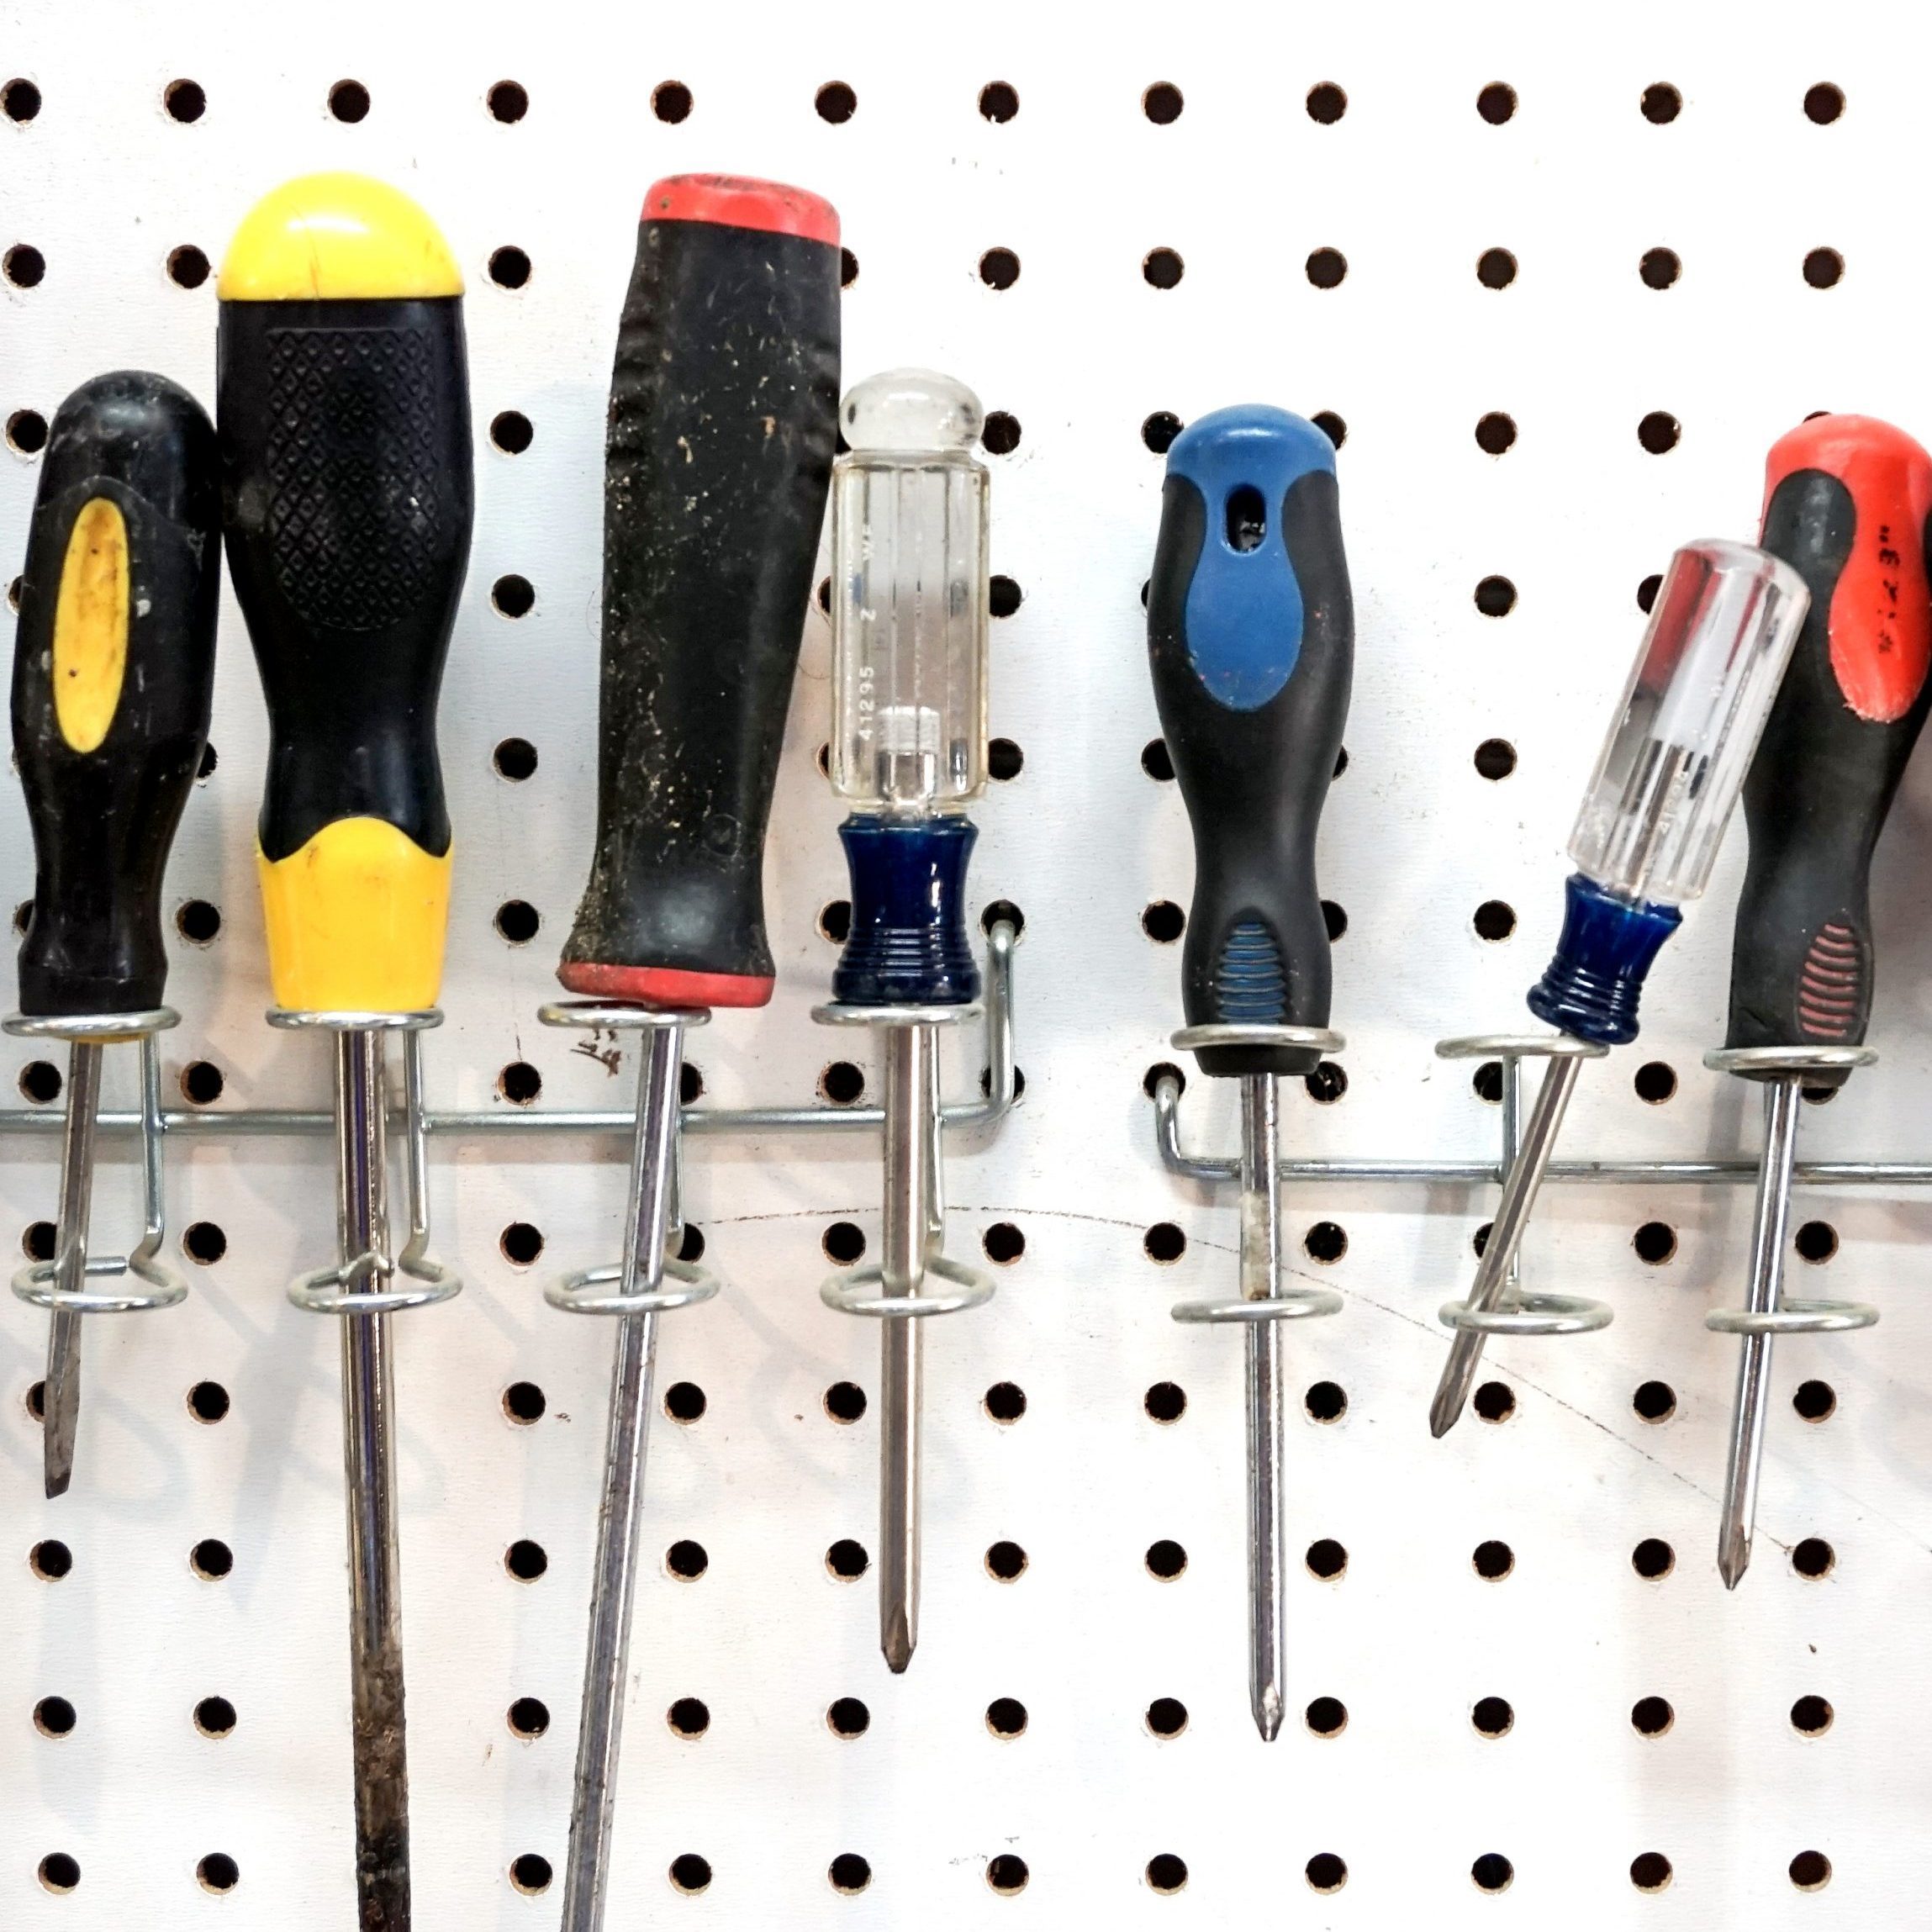 17 Types of Screwdrivers and How to Choose